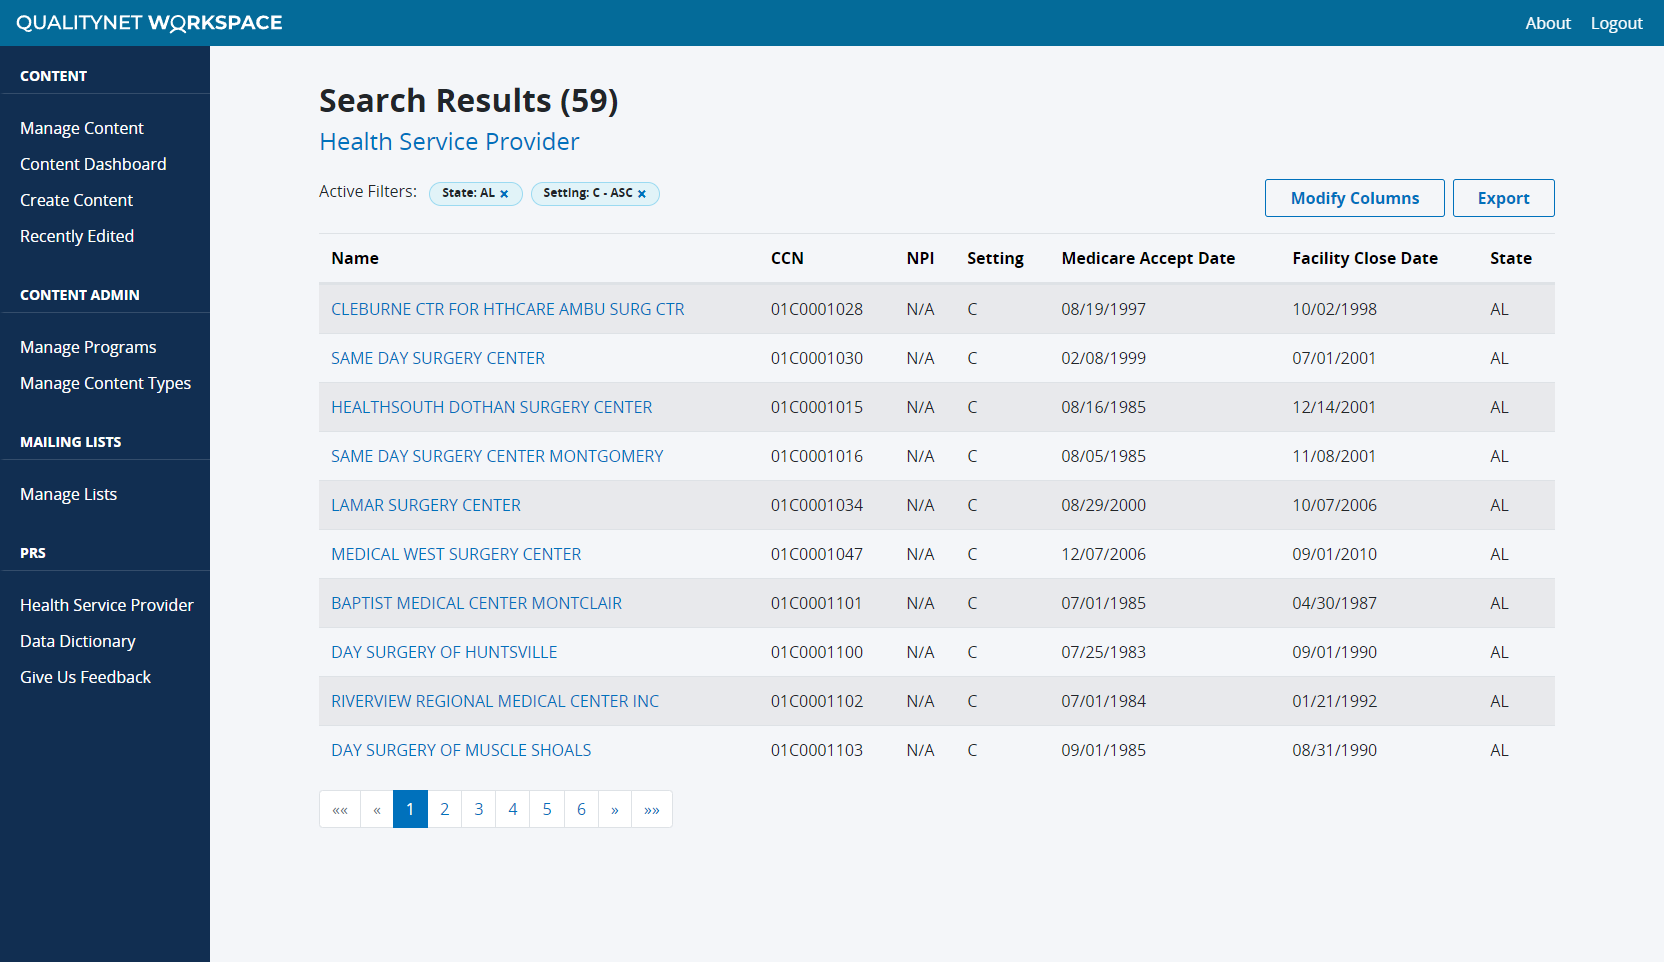 CMS data repository tool search results